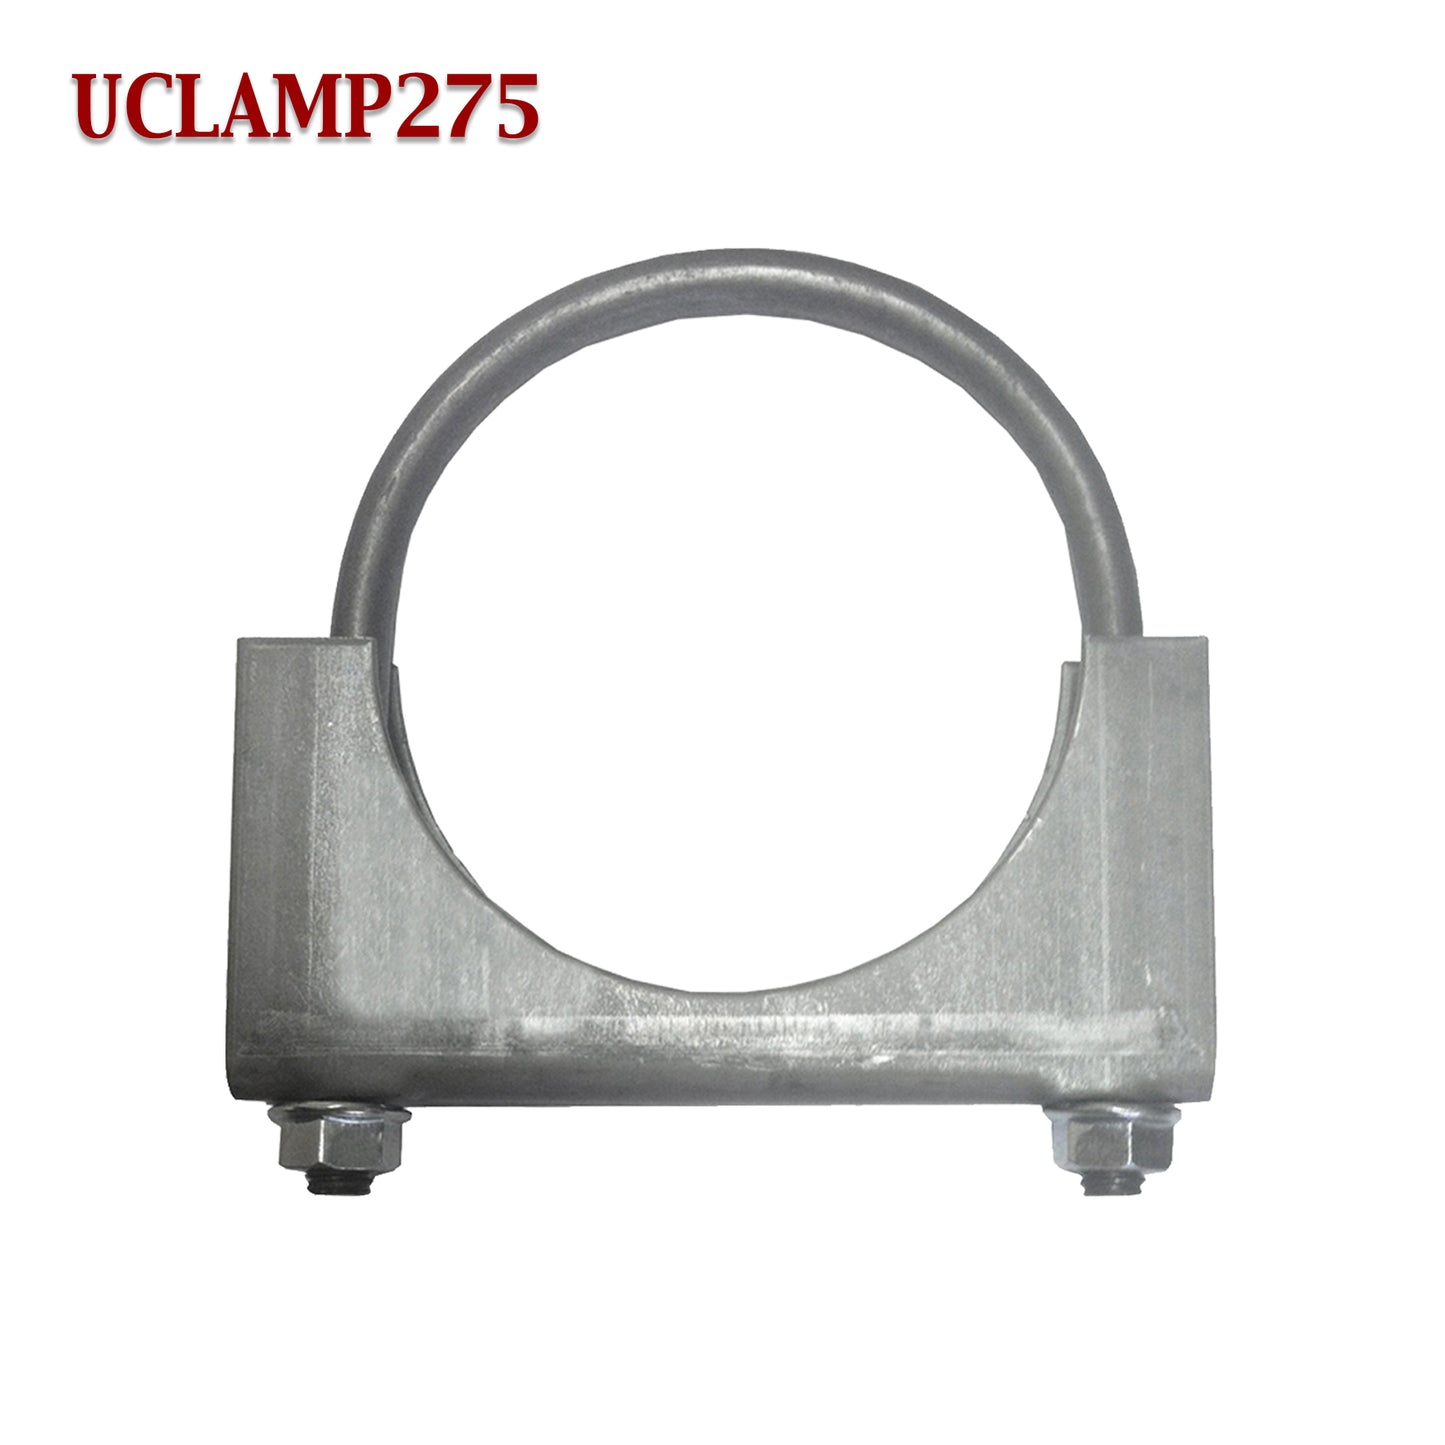 2 3/4" Exhaust Muffler Clamp U-Bolt Saddle Style For 2.75" Pipe